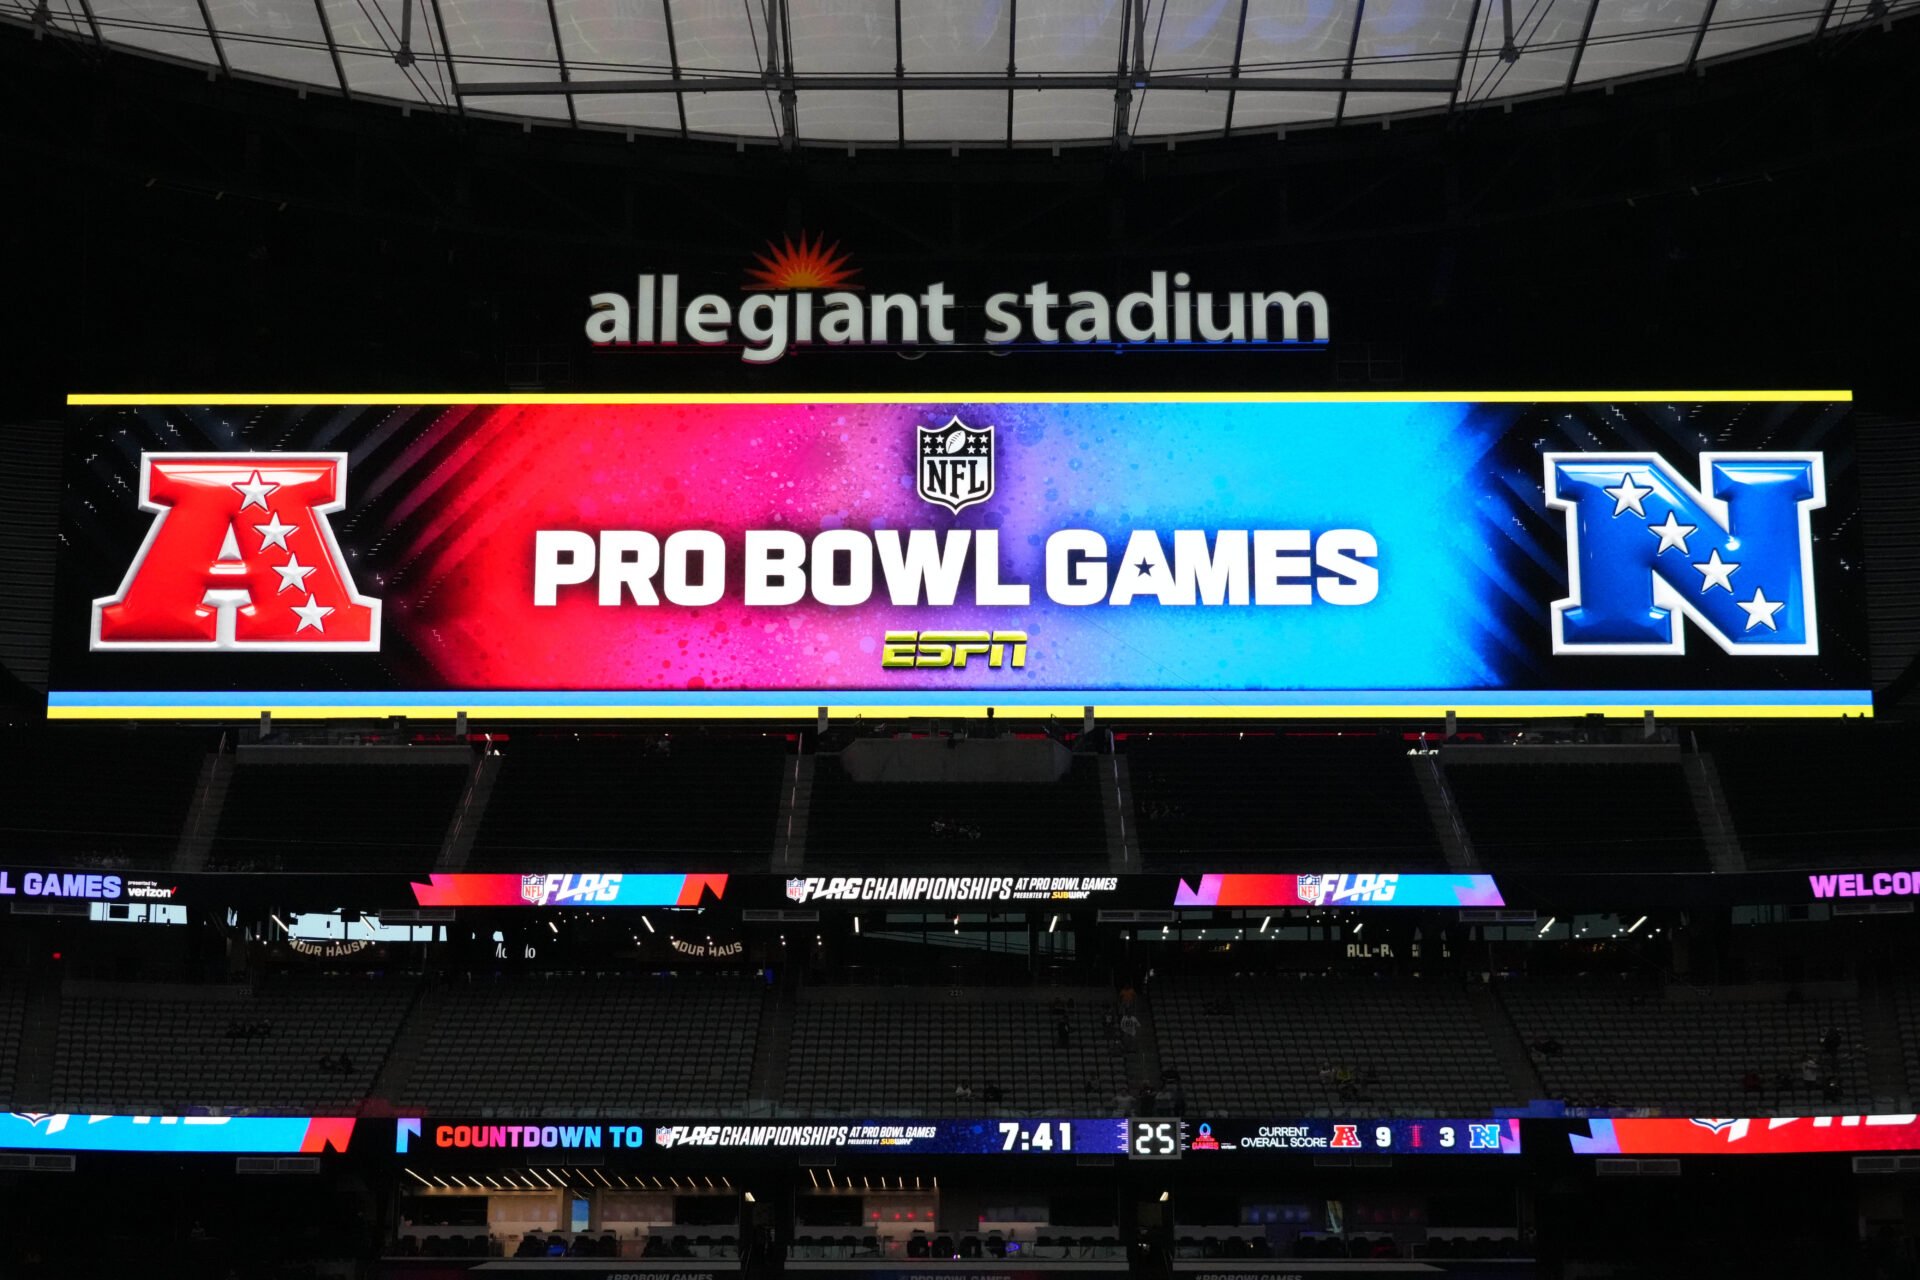 The AFC and NFC and Pro Bowl Games logo on the video board at Allegiant Stadium.